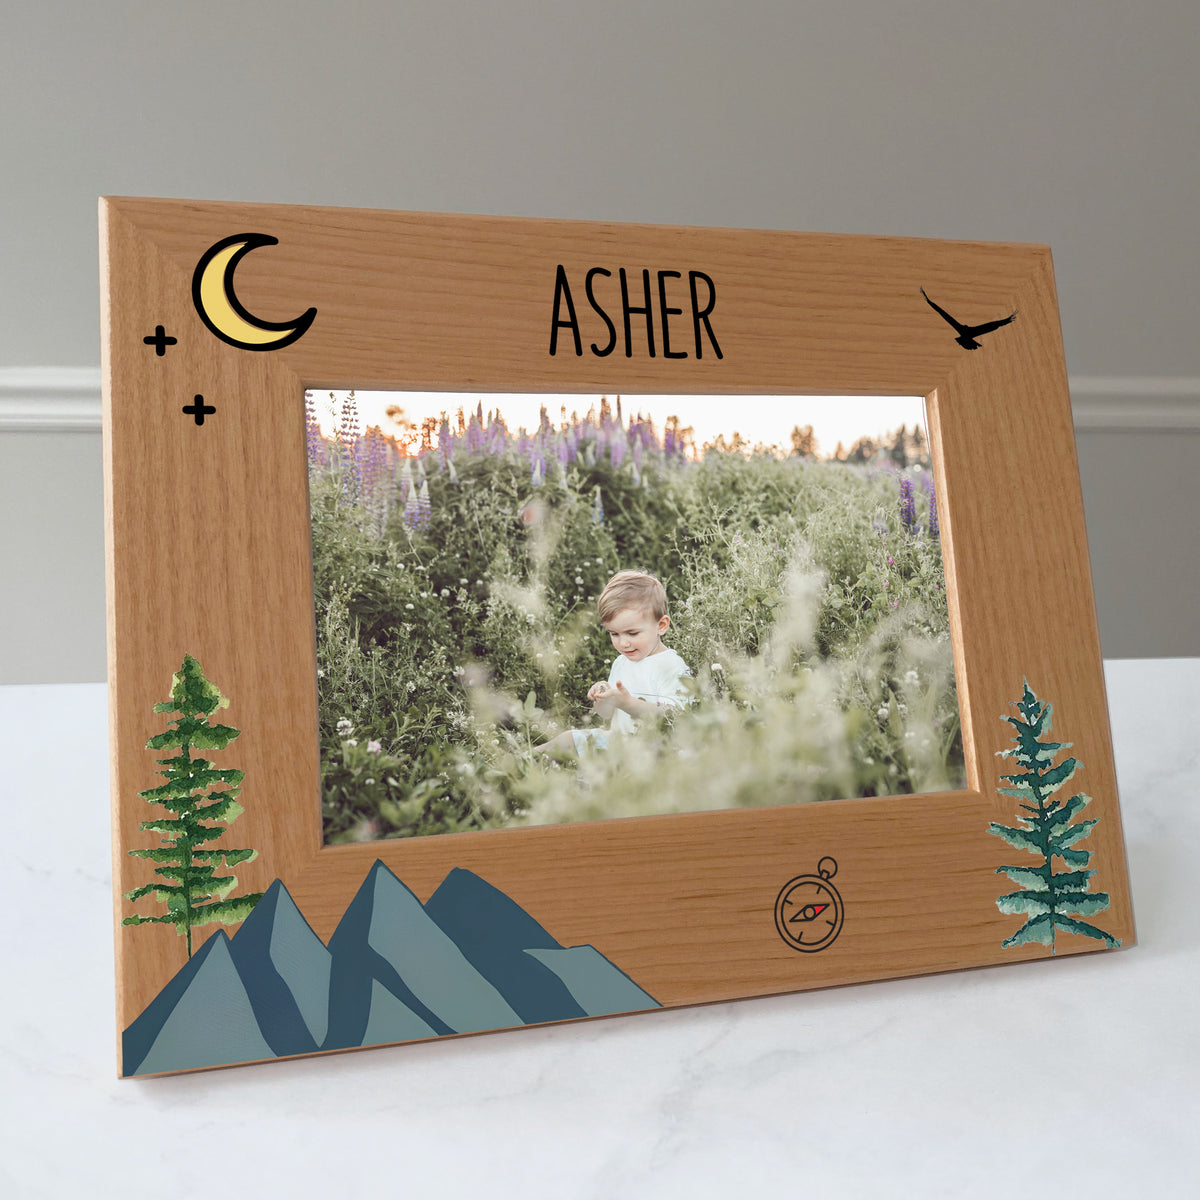 Outdoor mountains picture frame personalized, Baby gift / 4x6 photo frame / Printed